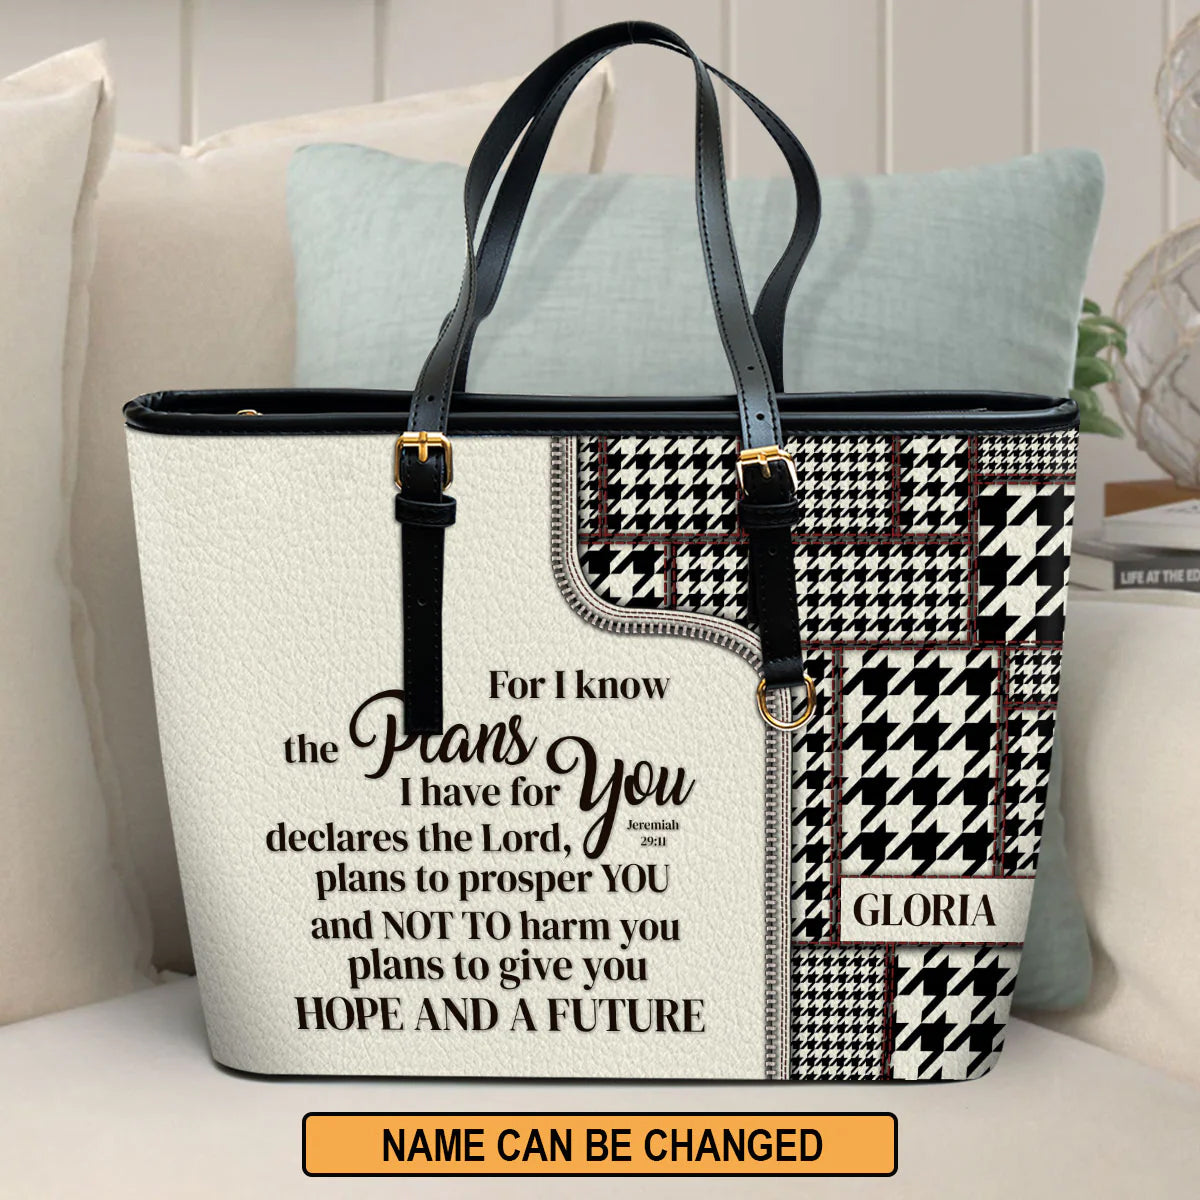 Christianart Handbag, Personalized Hand Bag, For I Know The Plans I Have For You Jeremiah 29:11, Personalized Gifts, Gifts for Women. - Christian Art Bag